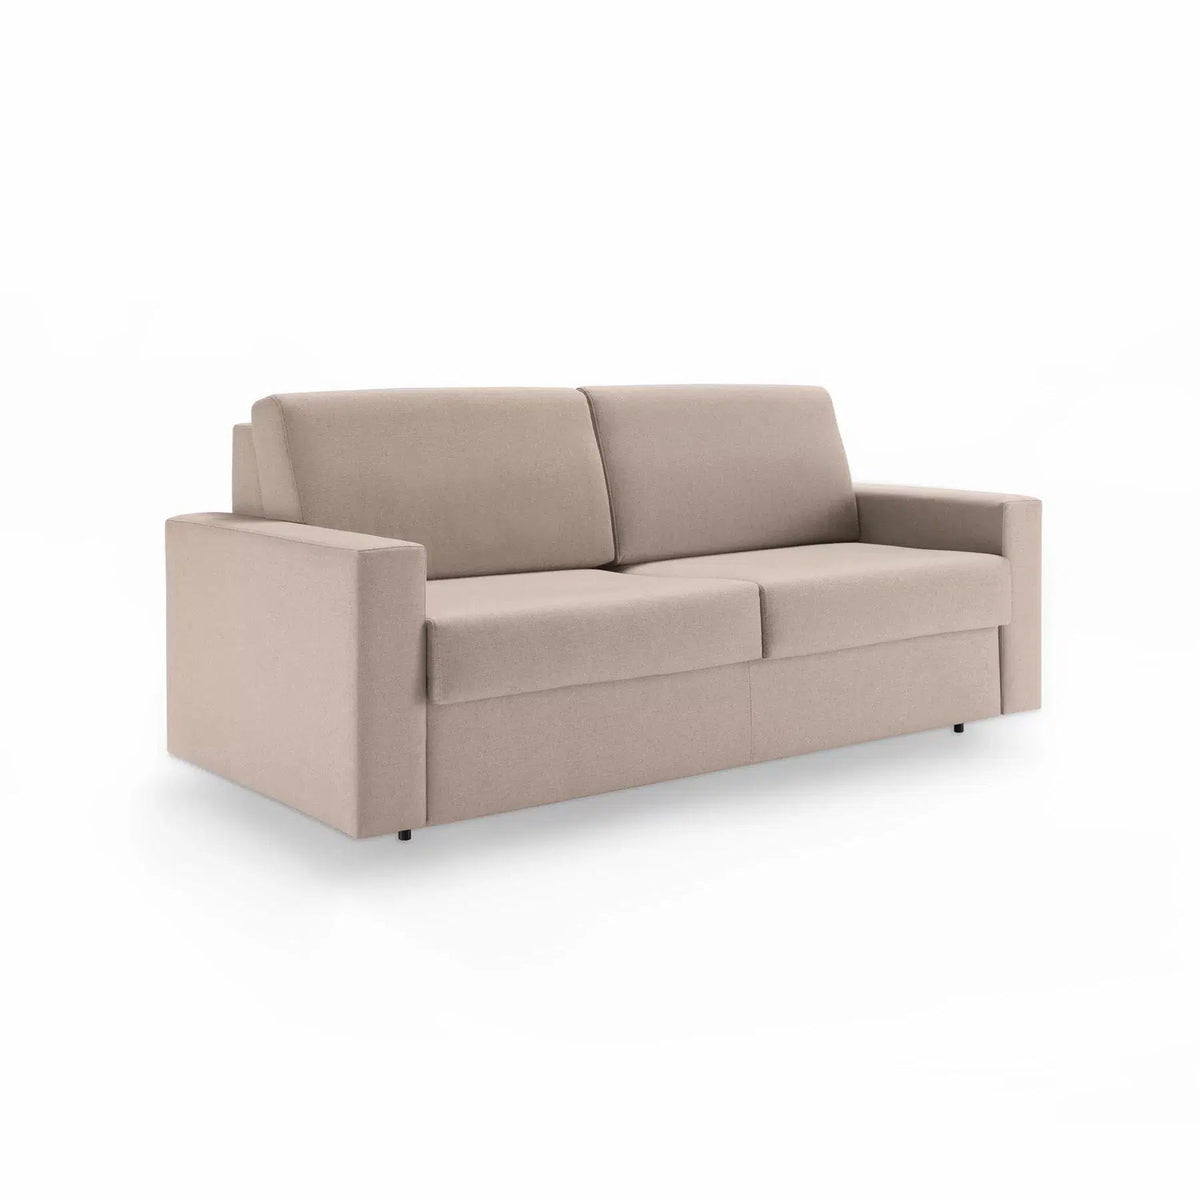 Marc 880 Sofa Bed-TM Leader-Contract Furniture Store